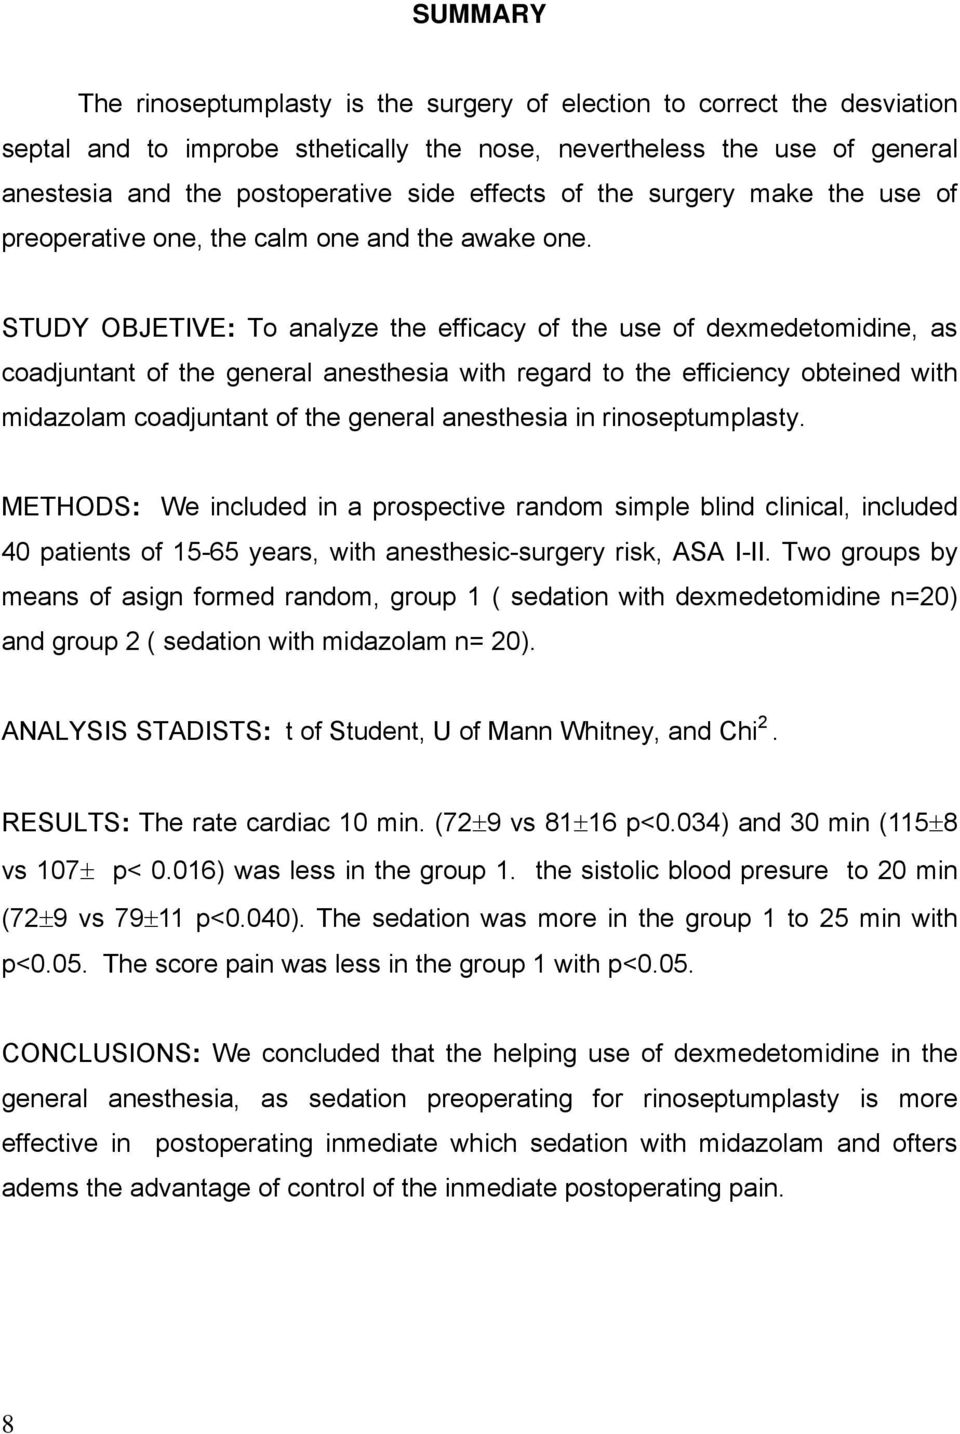 STUDY OBJETIVE: To analyze the efficacy of the use of dexmedetomidine, as coadjuntant of the general anesthesia with regard to the efficiency obteined with midazolam coadjuntant of the general